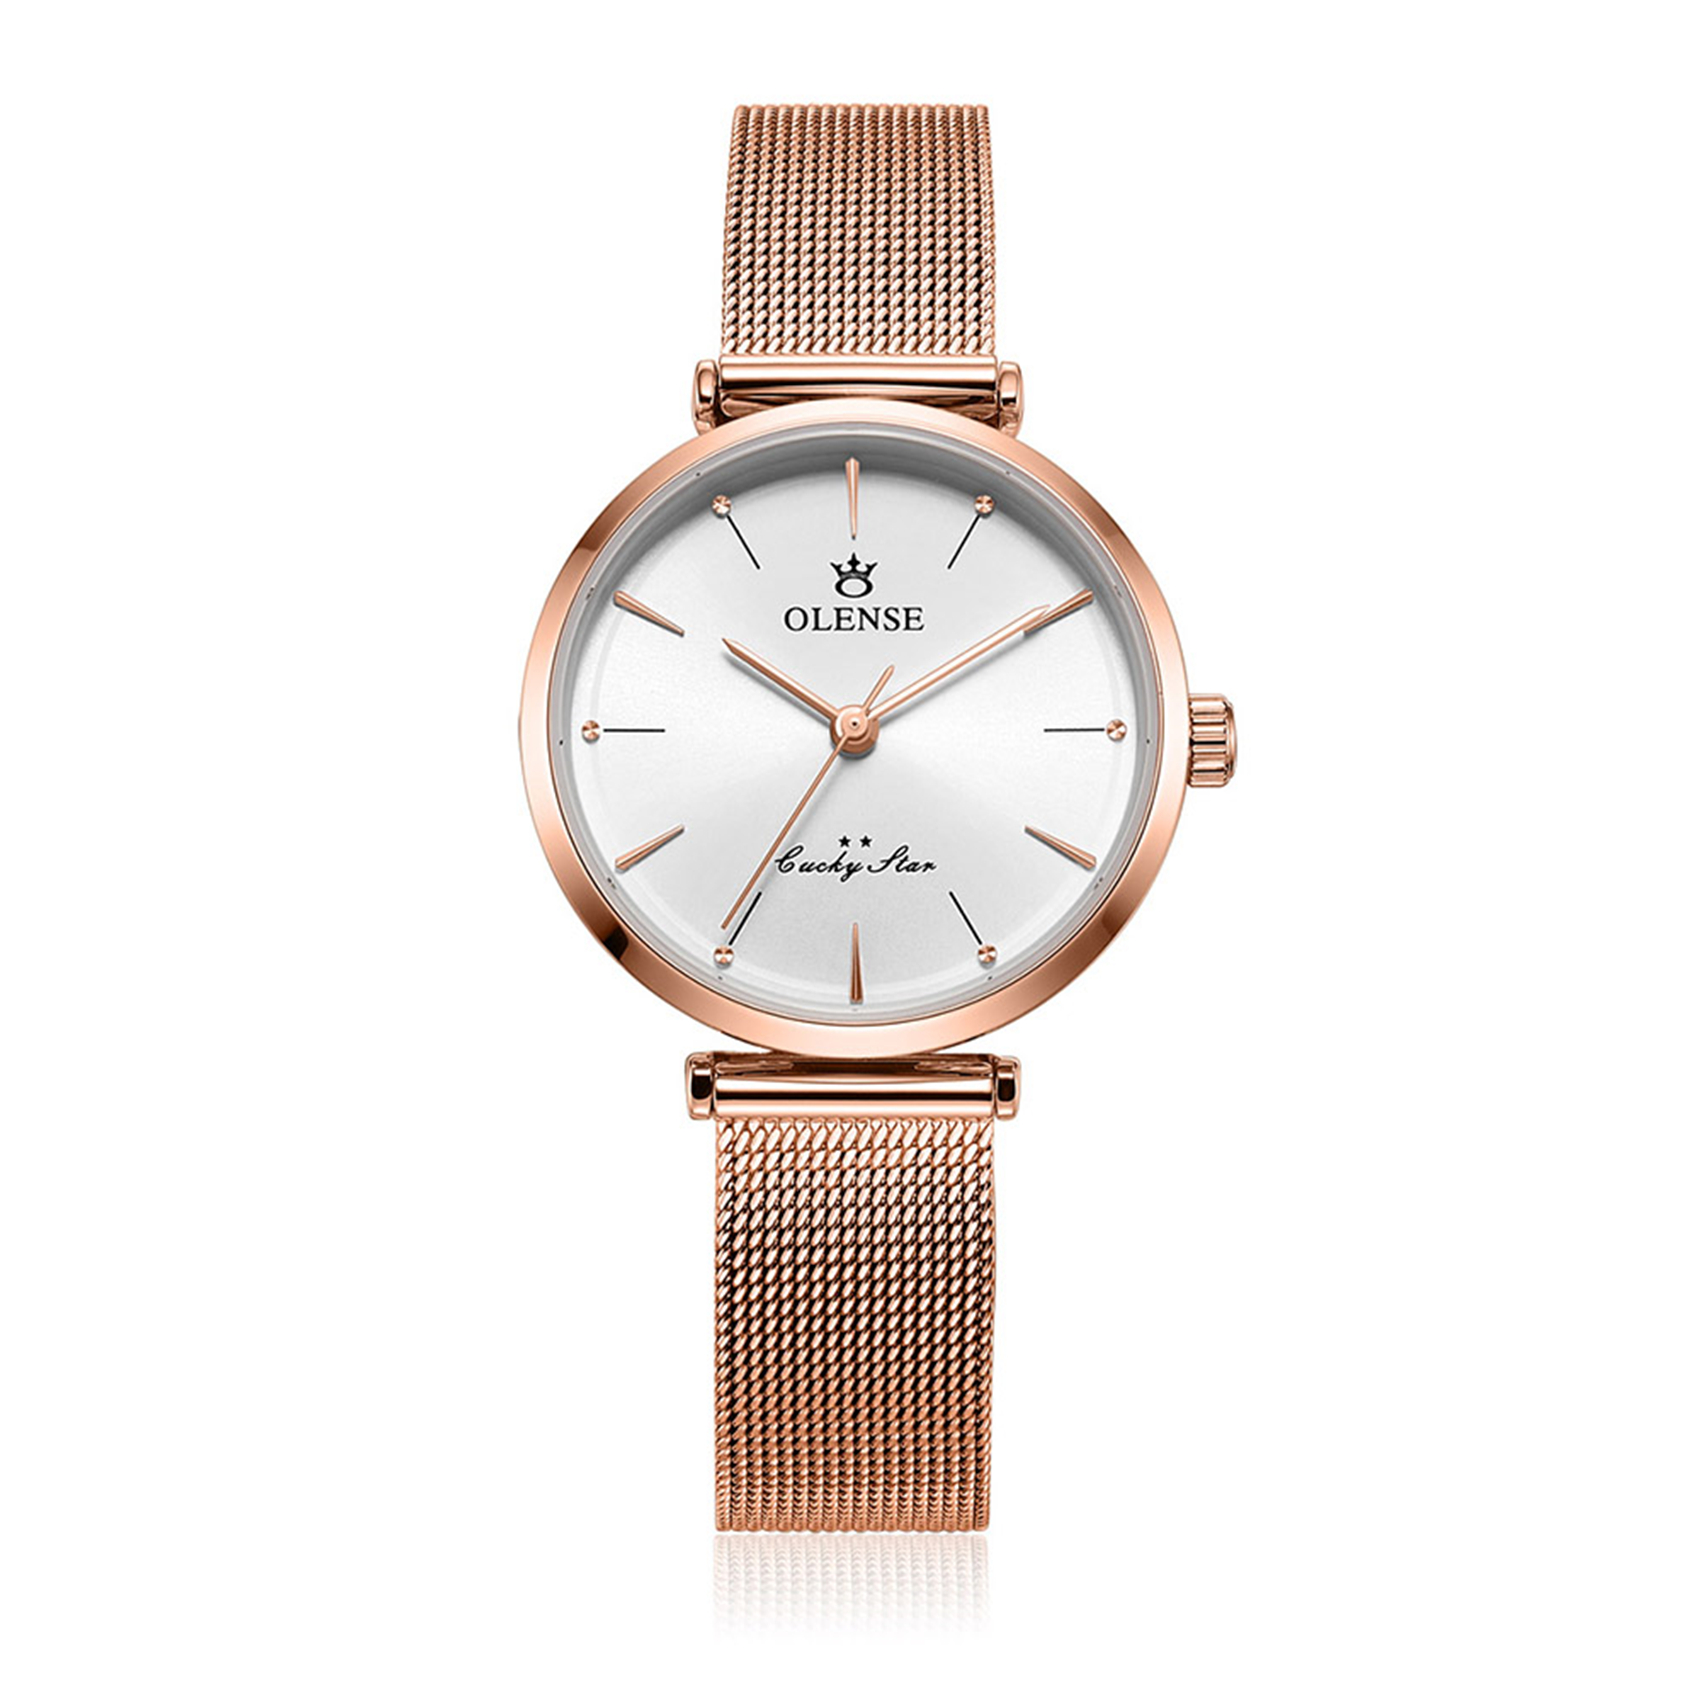 OLENSE - Ladies Classic Watch, Stainless Steel Mesh, 29mm, Rose Gold